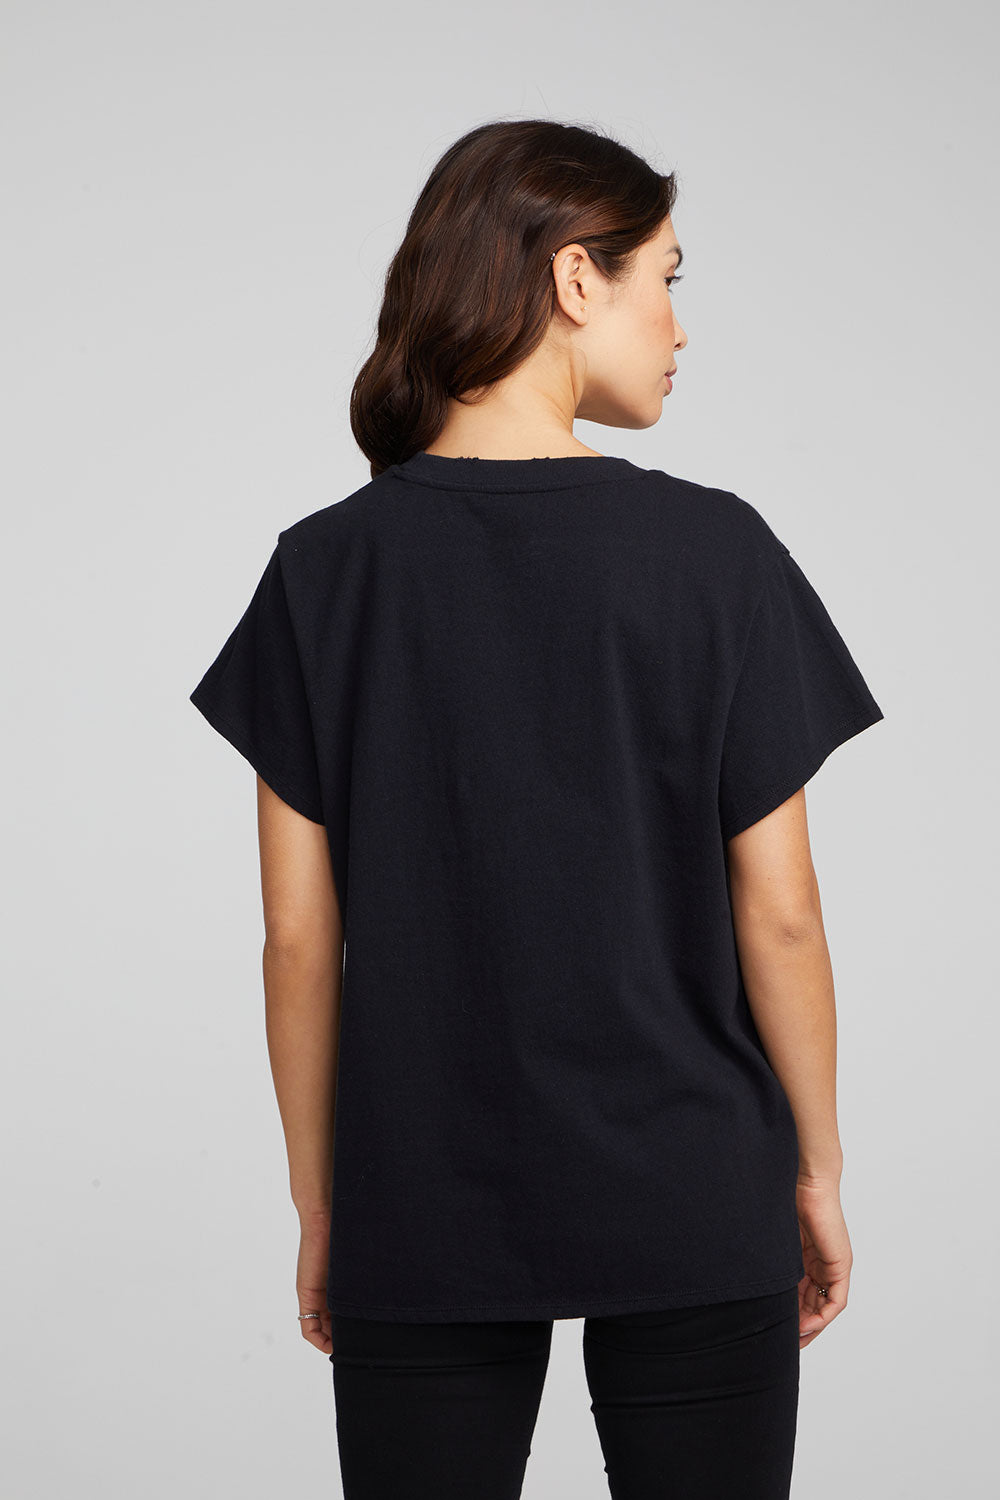 Electric Feel Tee WOMENS chaserbrand